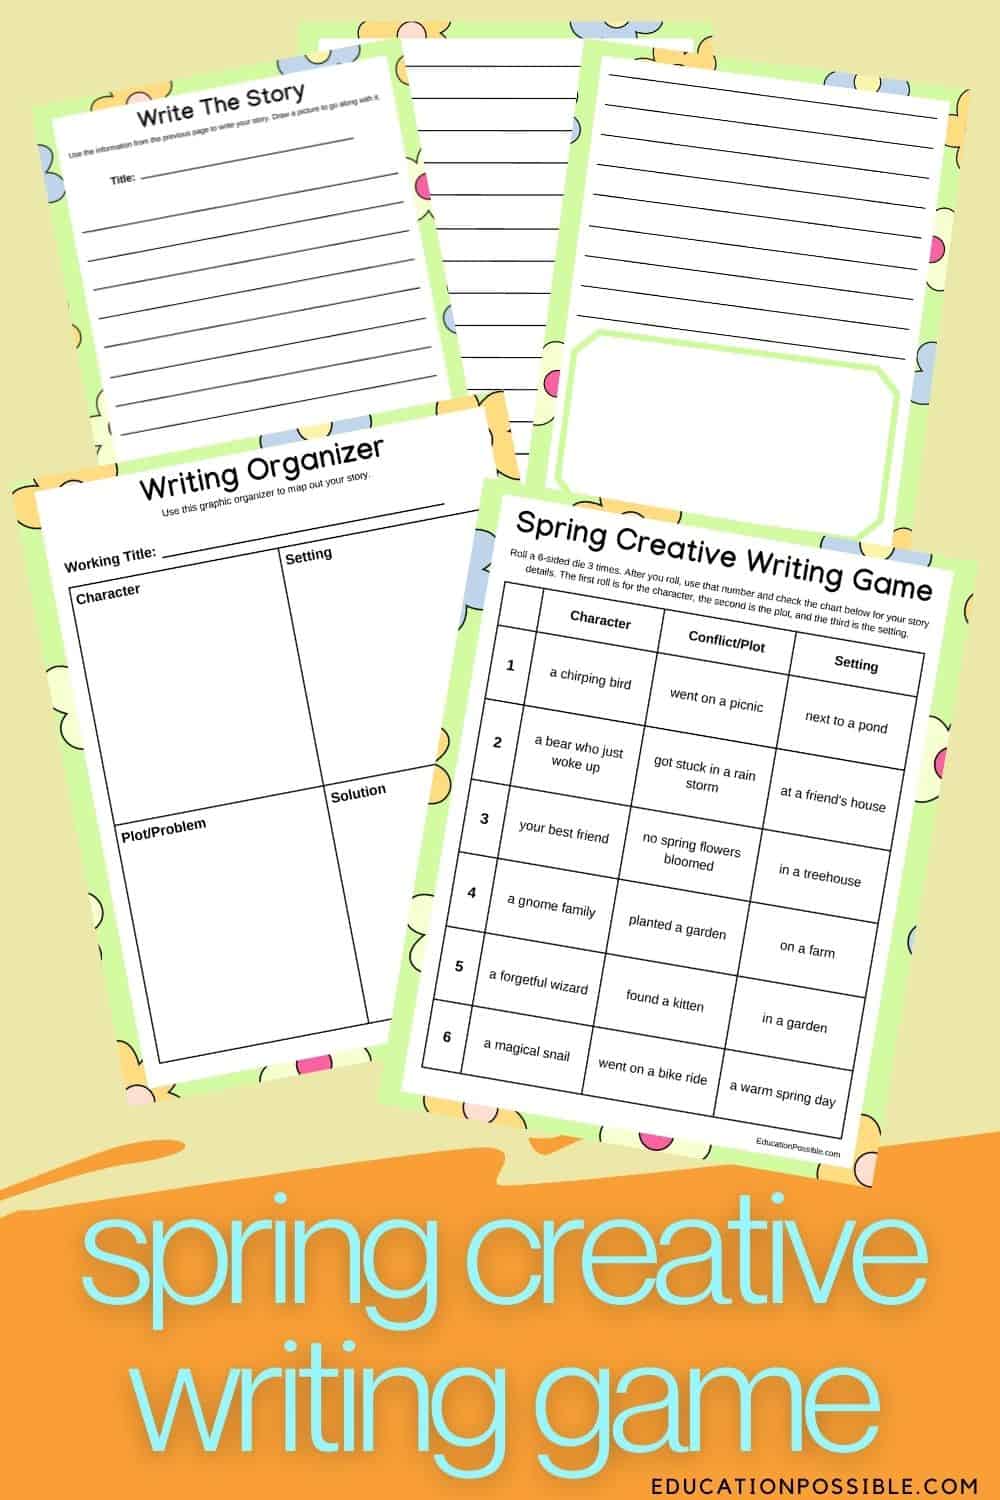 printable pages for a creative writing game for tweens and teens.